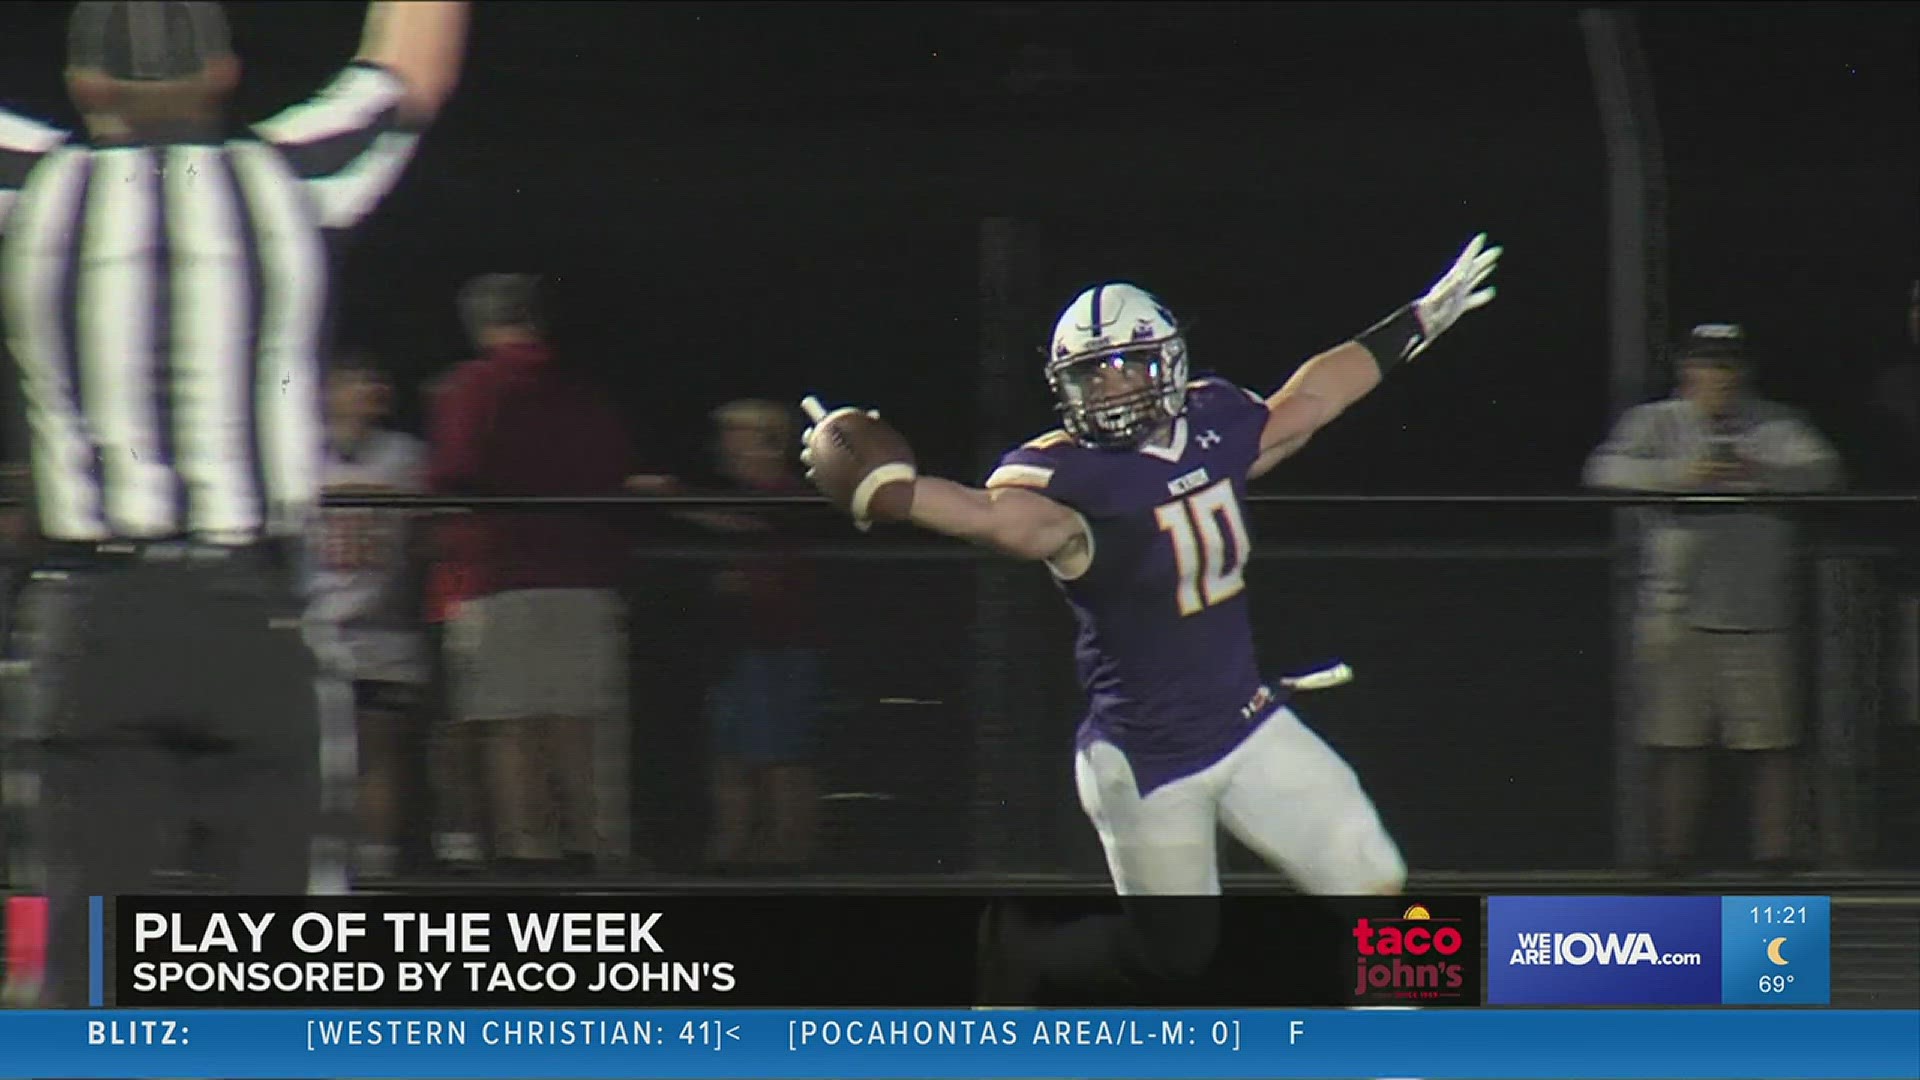 The 'Play of the Week' is brought to you by Taco John's.